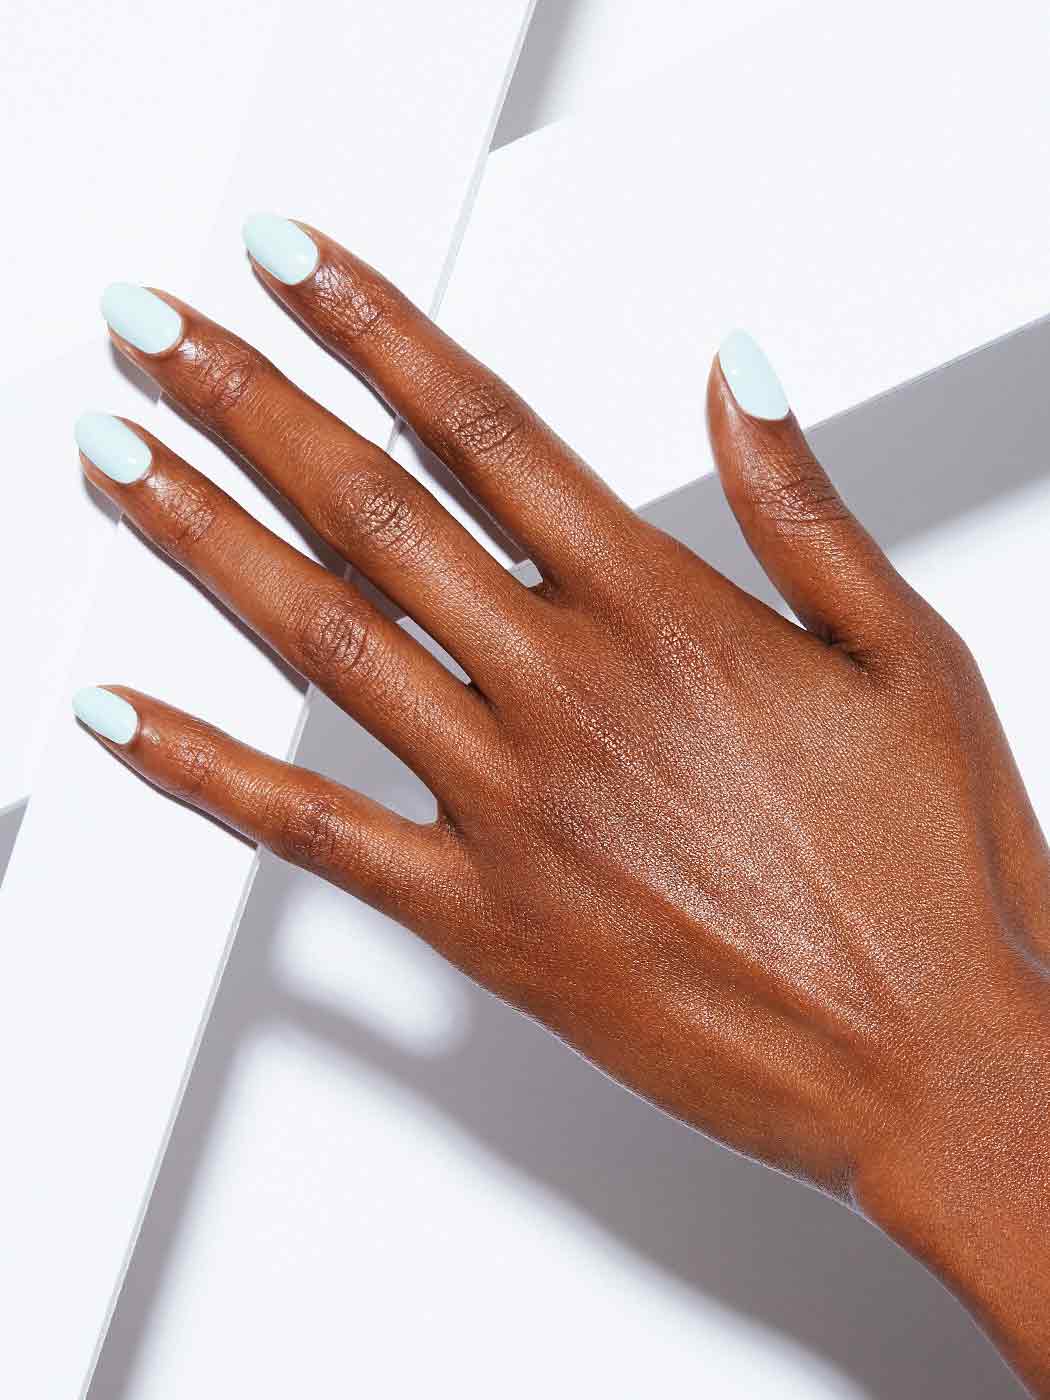 Soft mint blue with green undertones, Full coverage, Rich